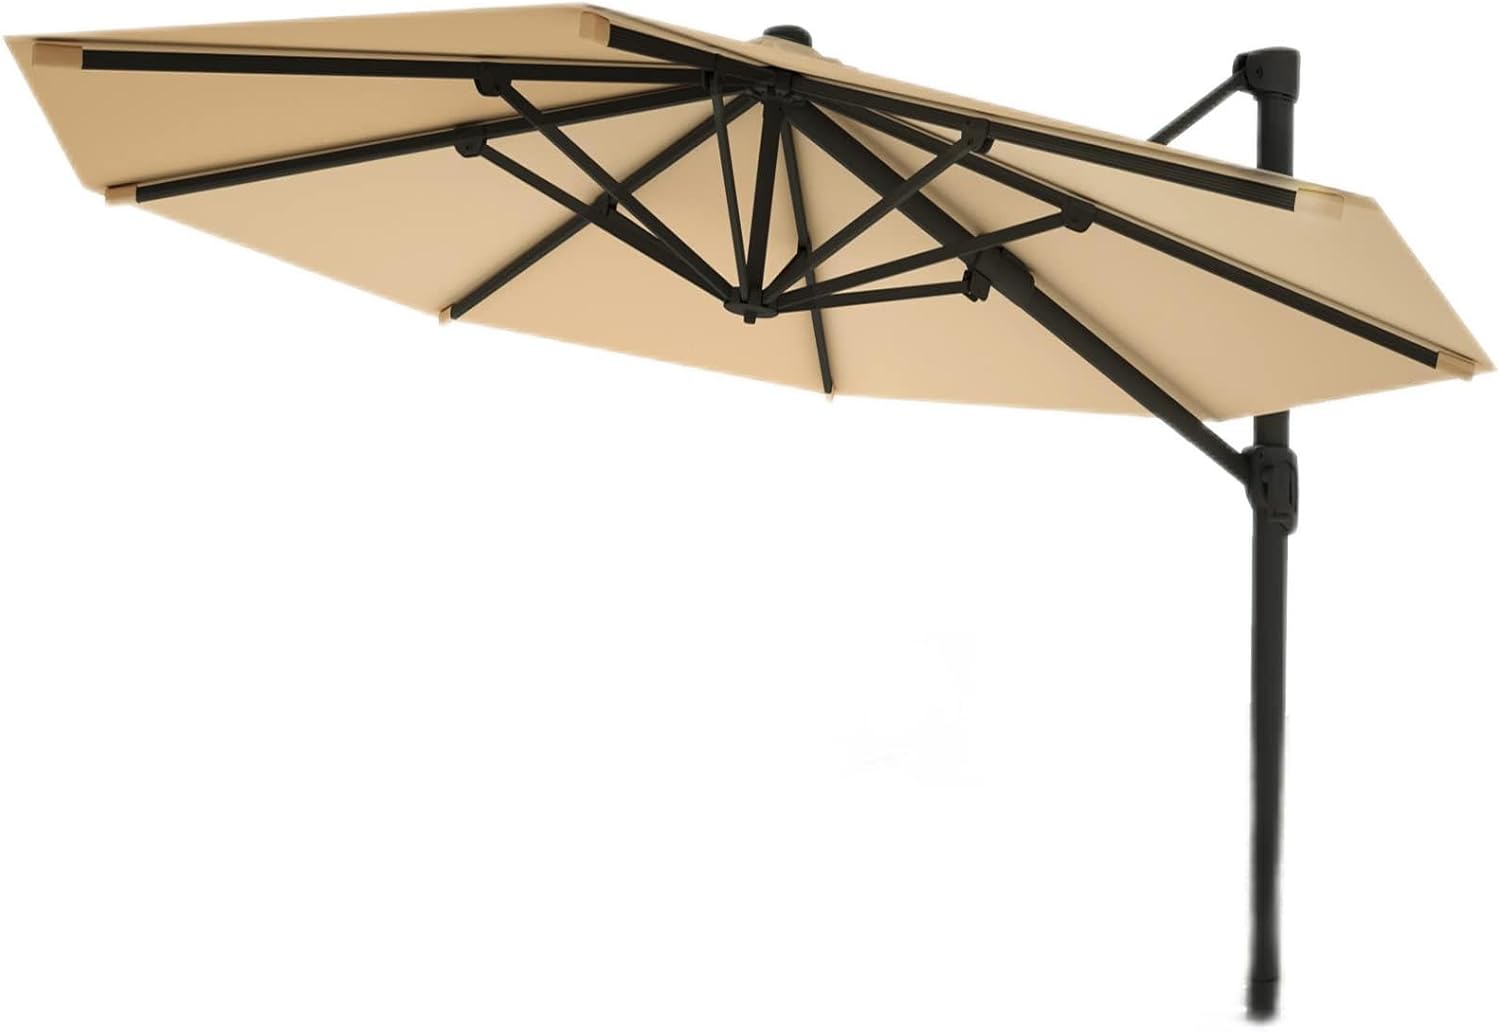 wikiwiki 12 FT Cantilever Patio Umbrellas Outdoor Large Offset Umbrella w/ 36 Month Fade Resistance Recycled Fabric, 6-Level 360Rotation Aluminum Pole for Deck Pool Garden, Beige